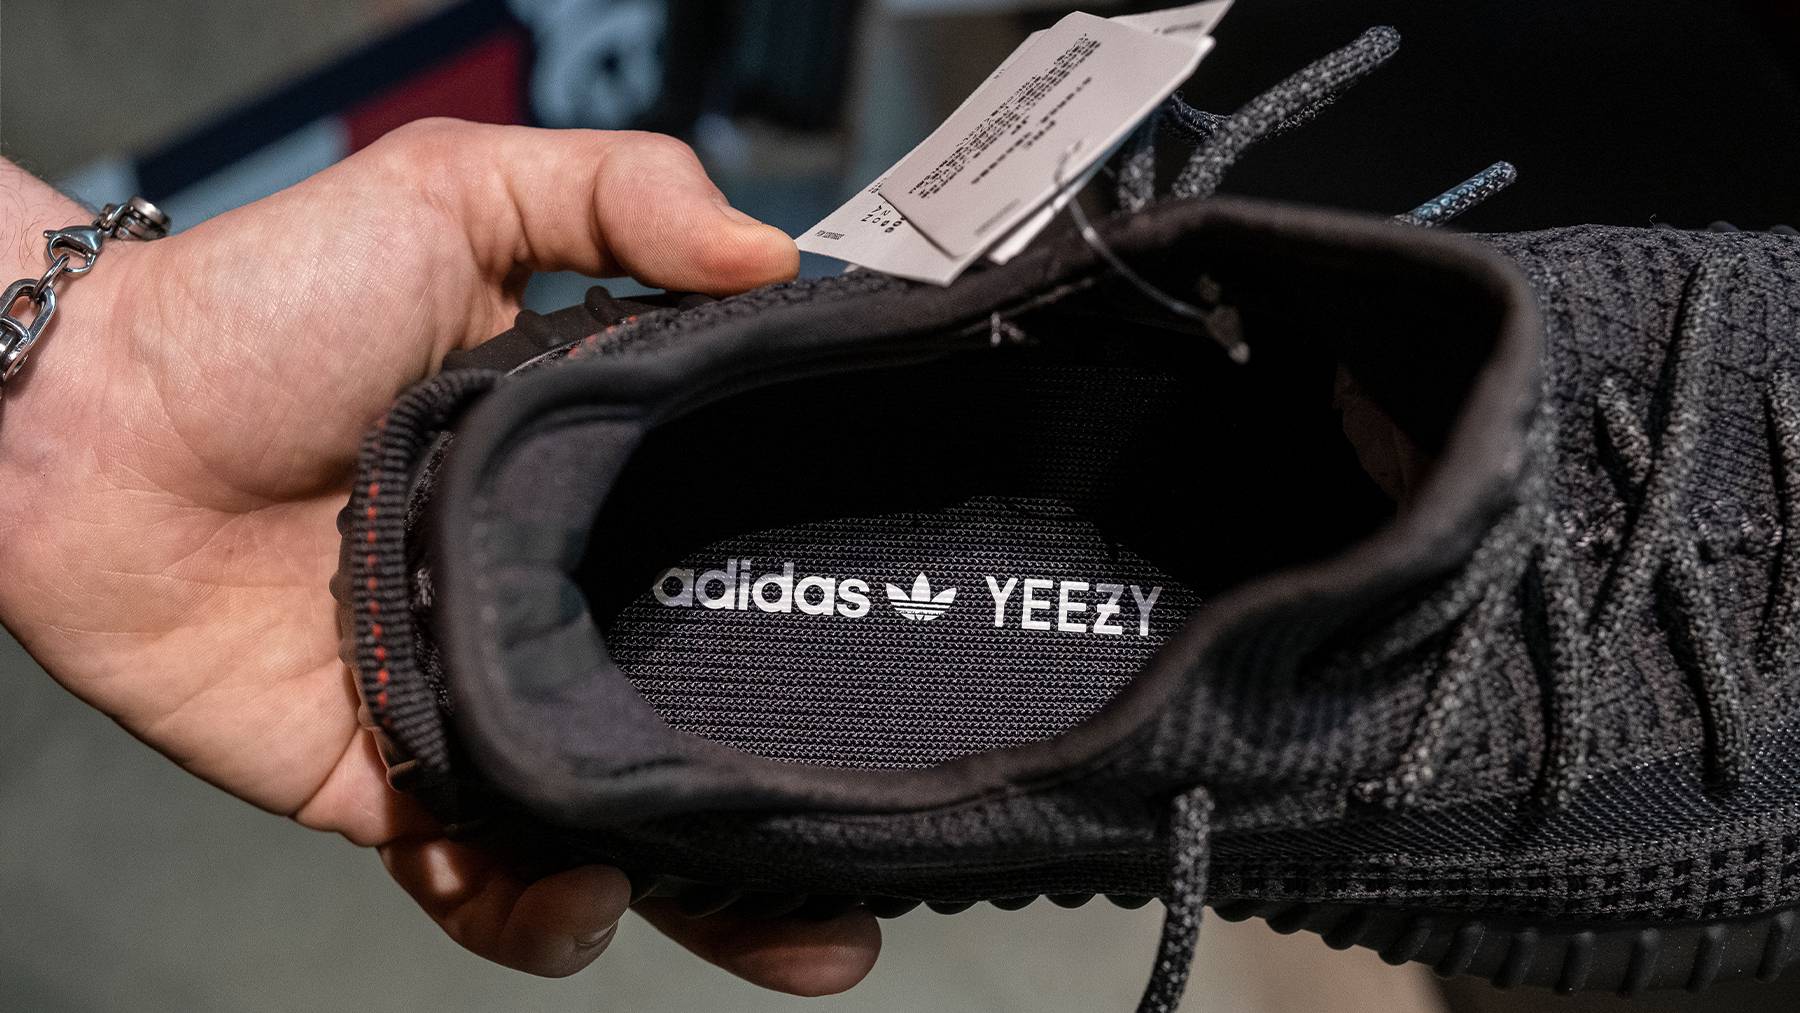 A reseller holds a Yeezy 350 sneaker to show the Adidas and Yeezy branding inside.